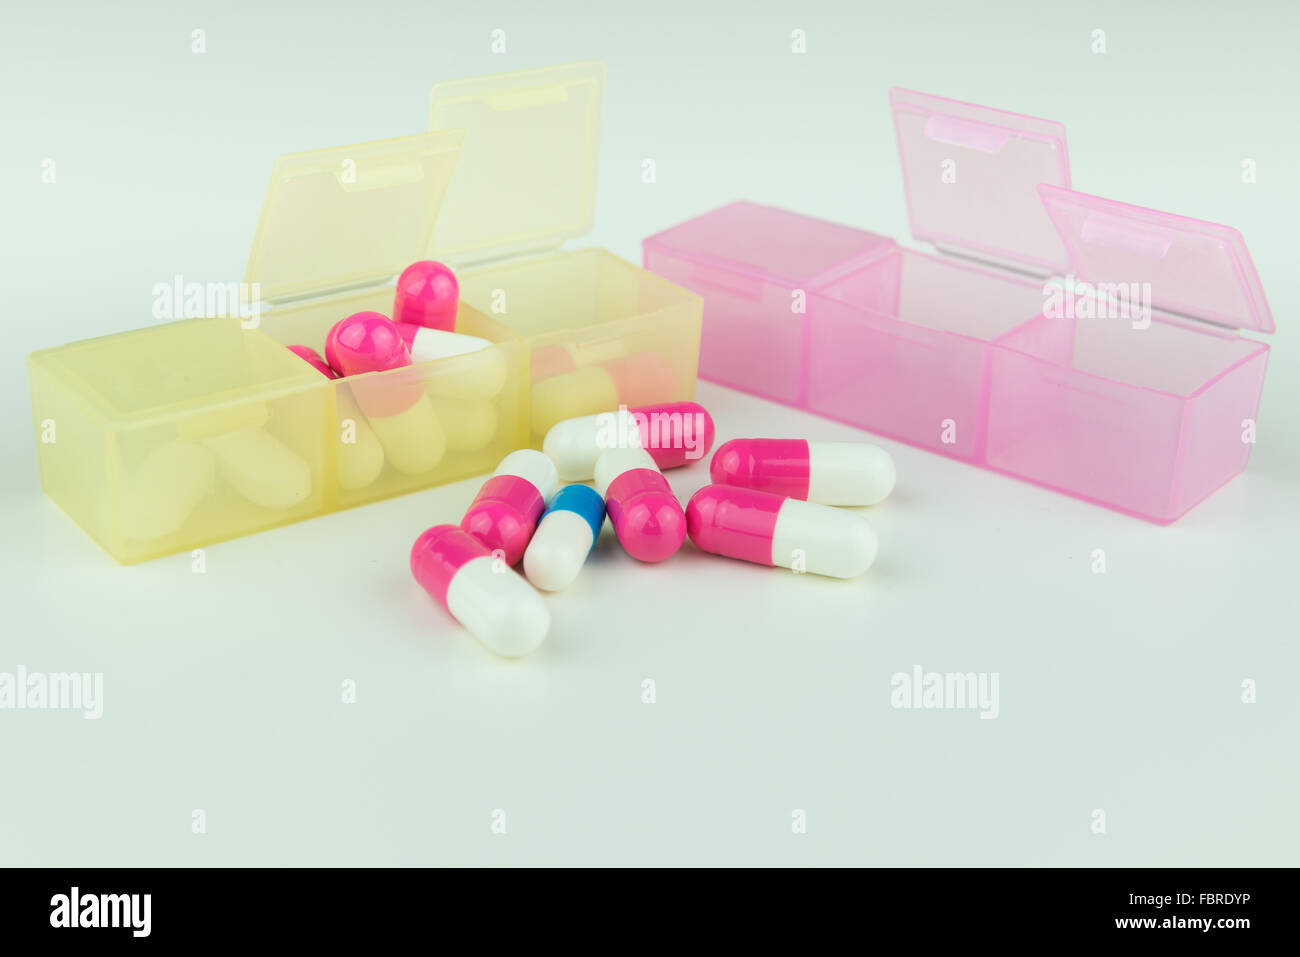 Several pills in partable compartments Stock Photo